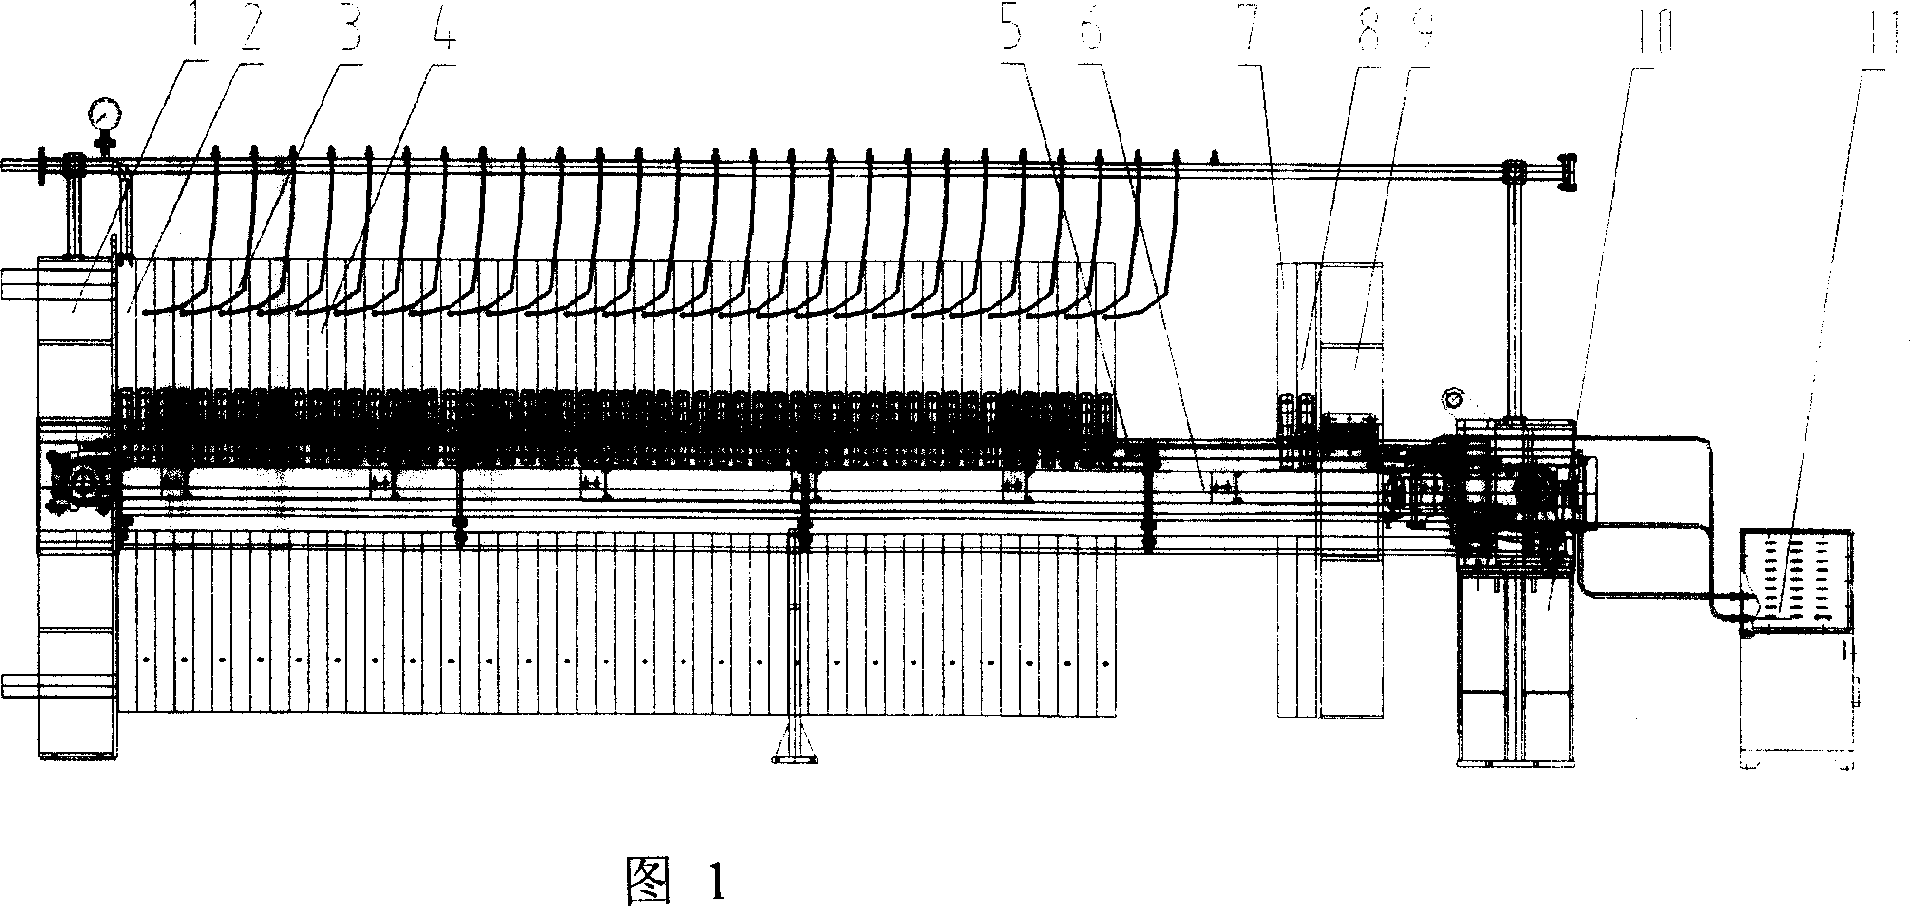 Filter-pressing process for producing malt extract during production of beer